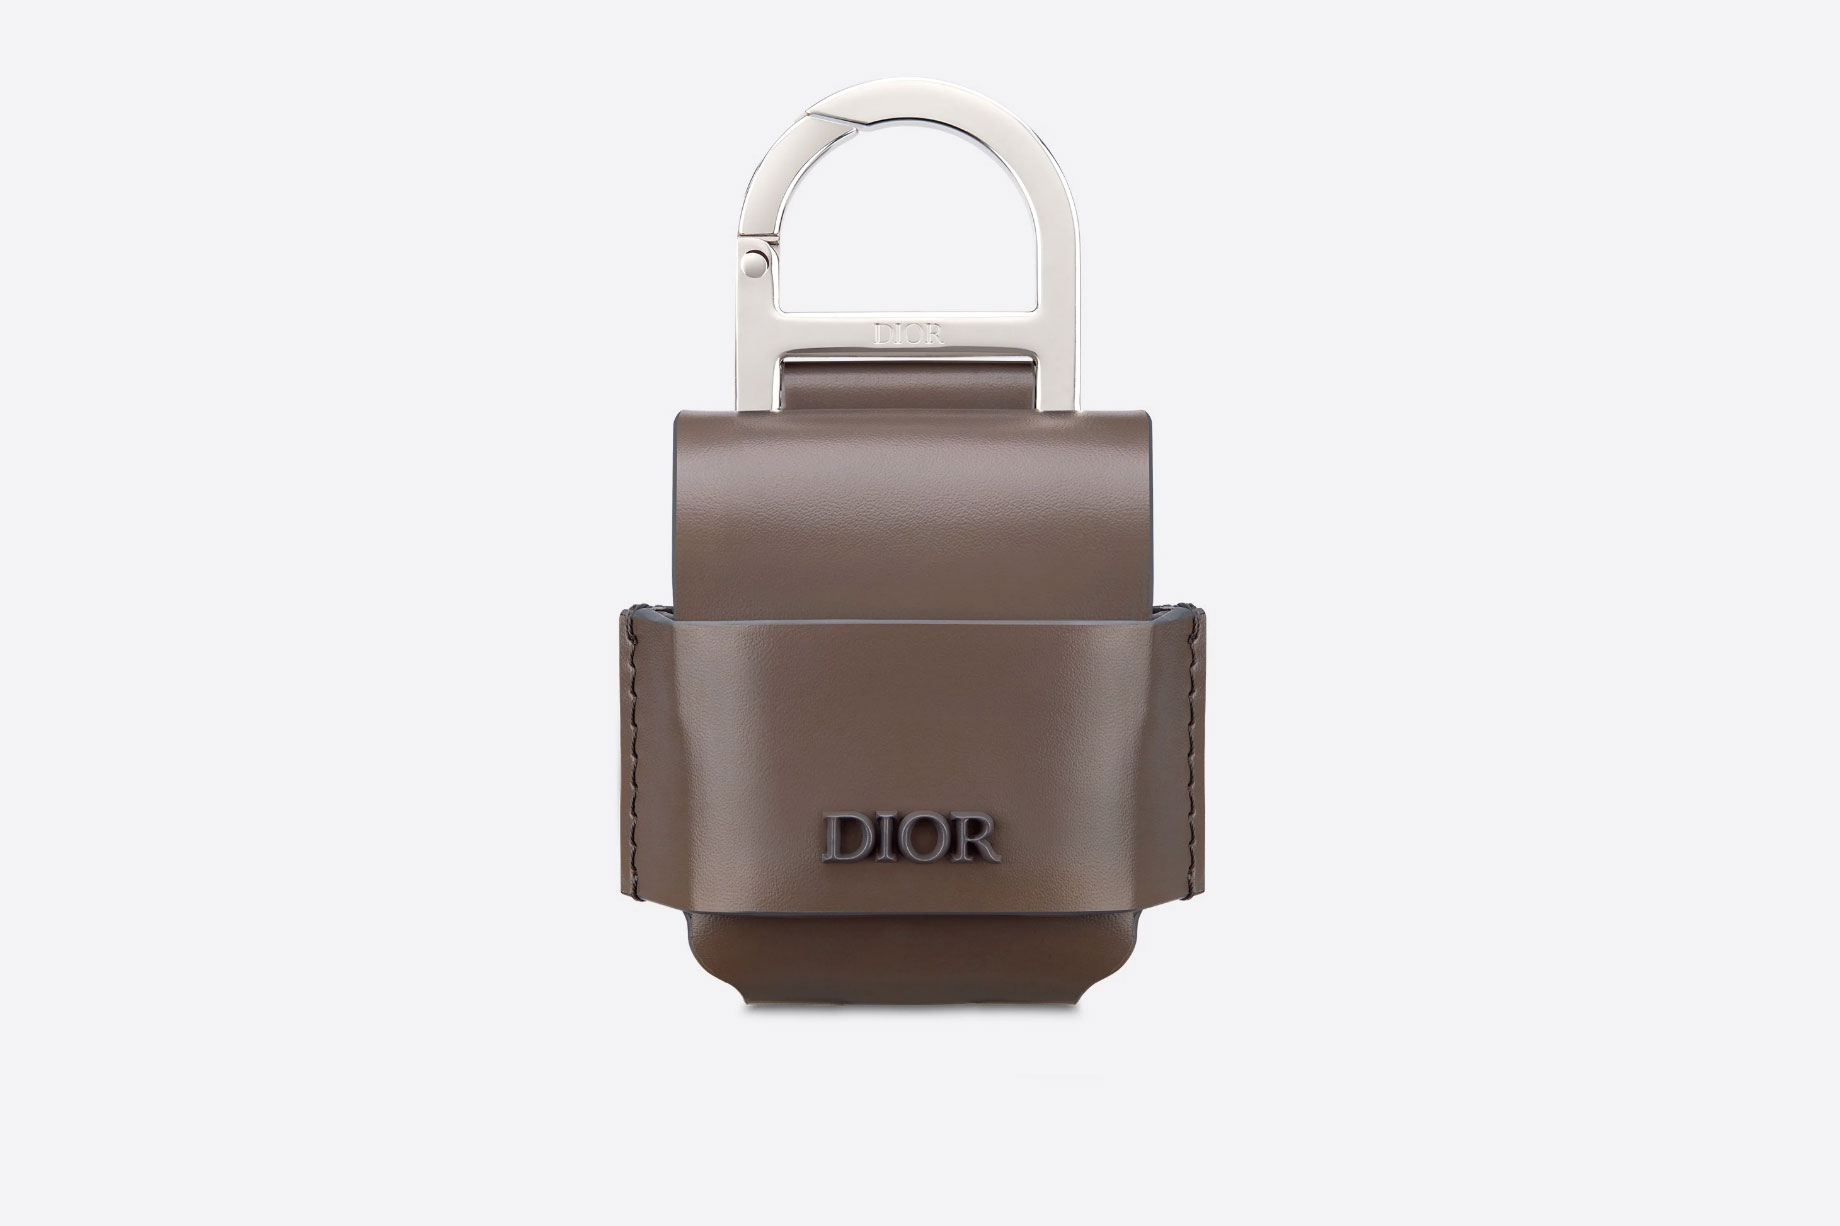 dior-leather-apple-airpods-cases-5.jpg